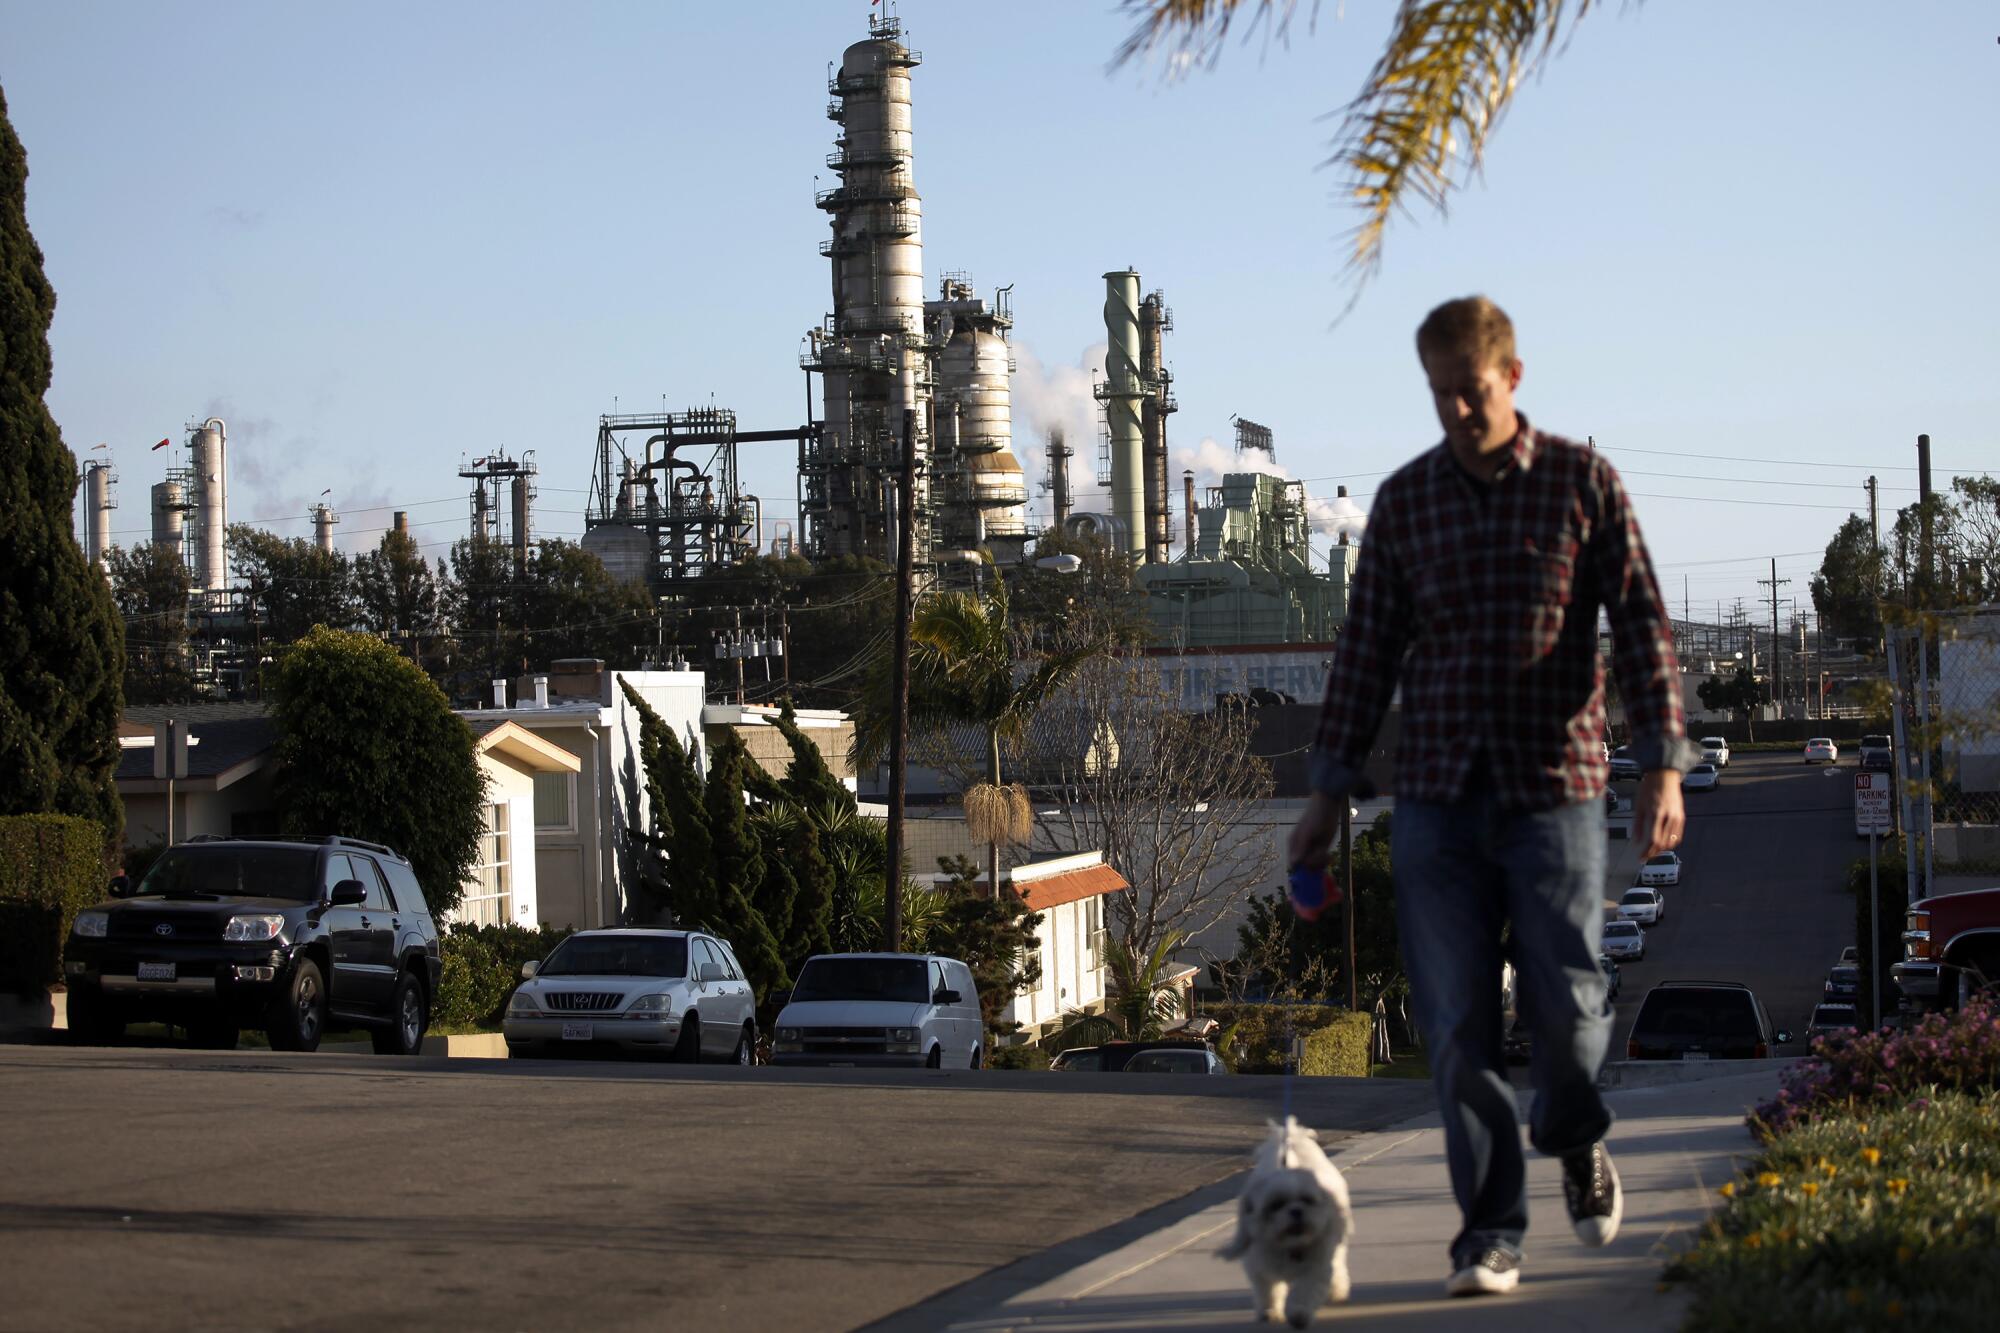 A man walks a dog with an oil refinery in the background